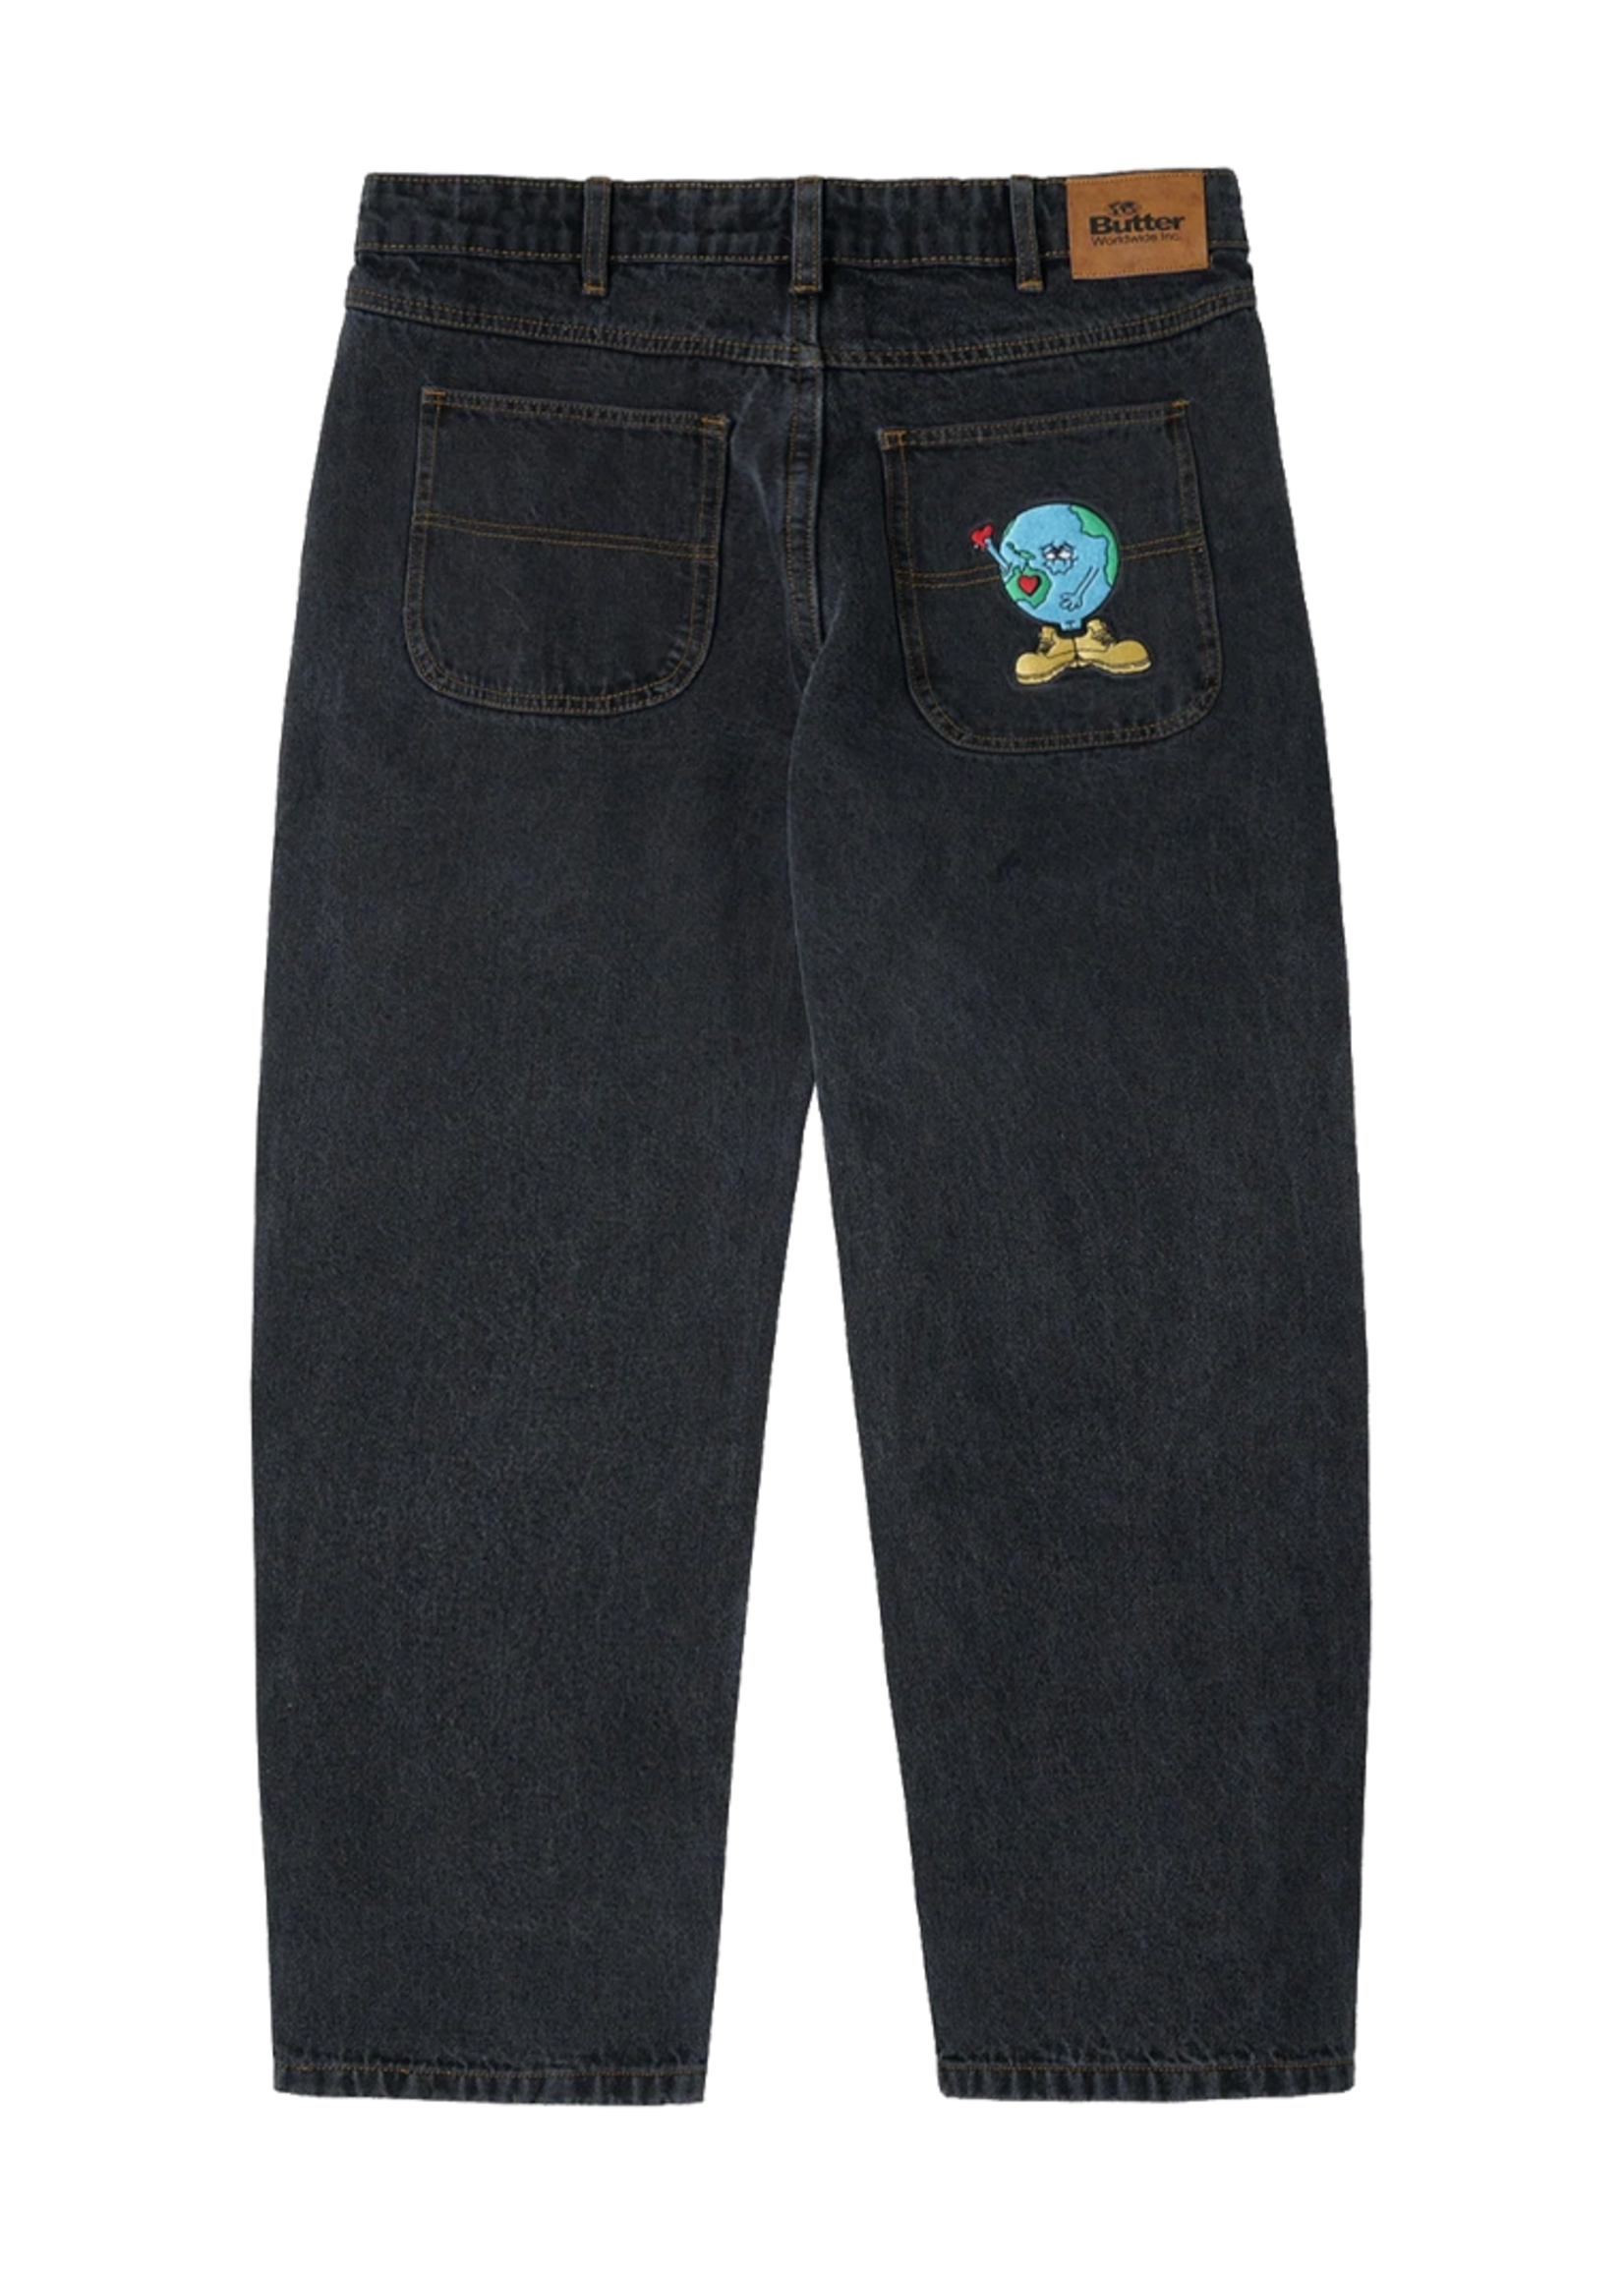 BUTTER GOODS BUTTER TIMBO DENIM - WASHED BLK